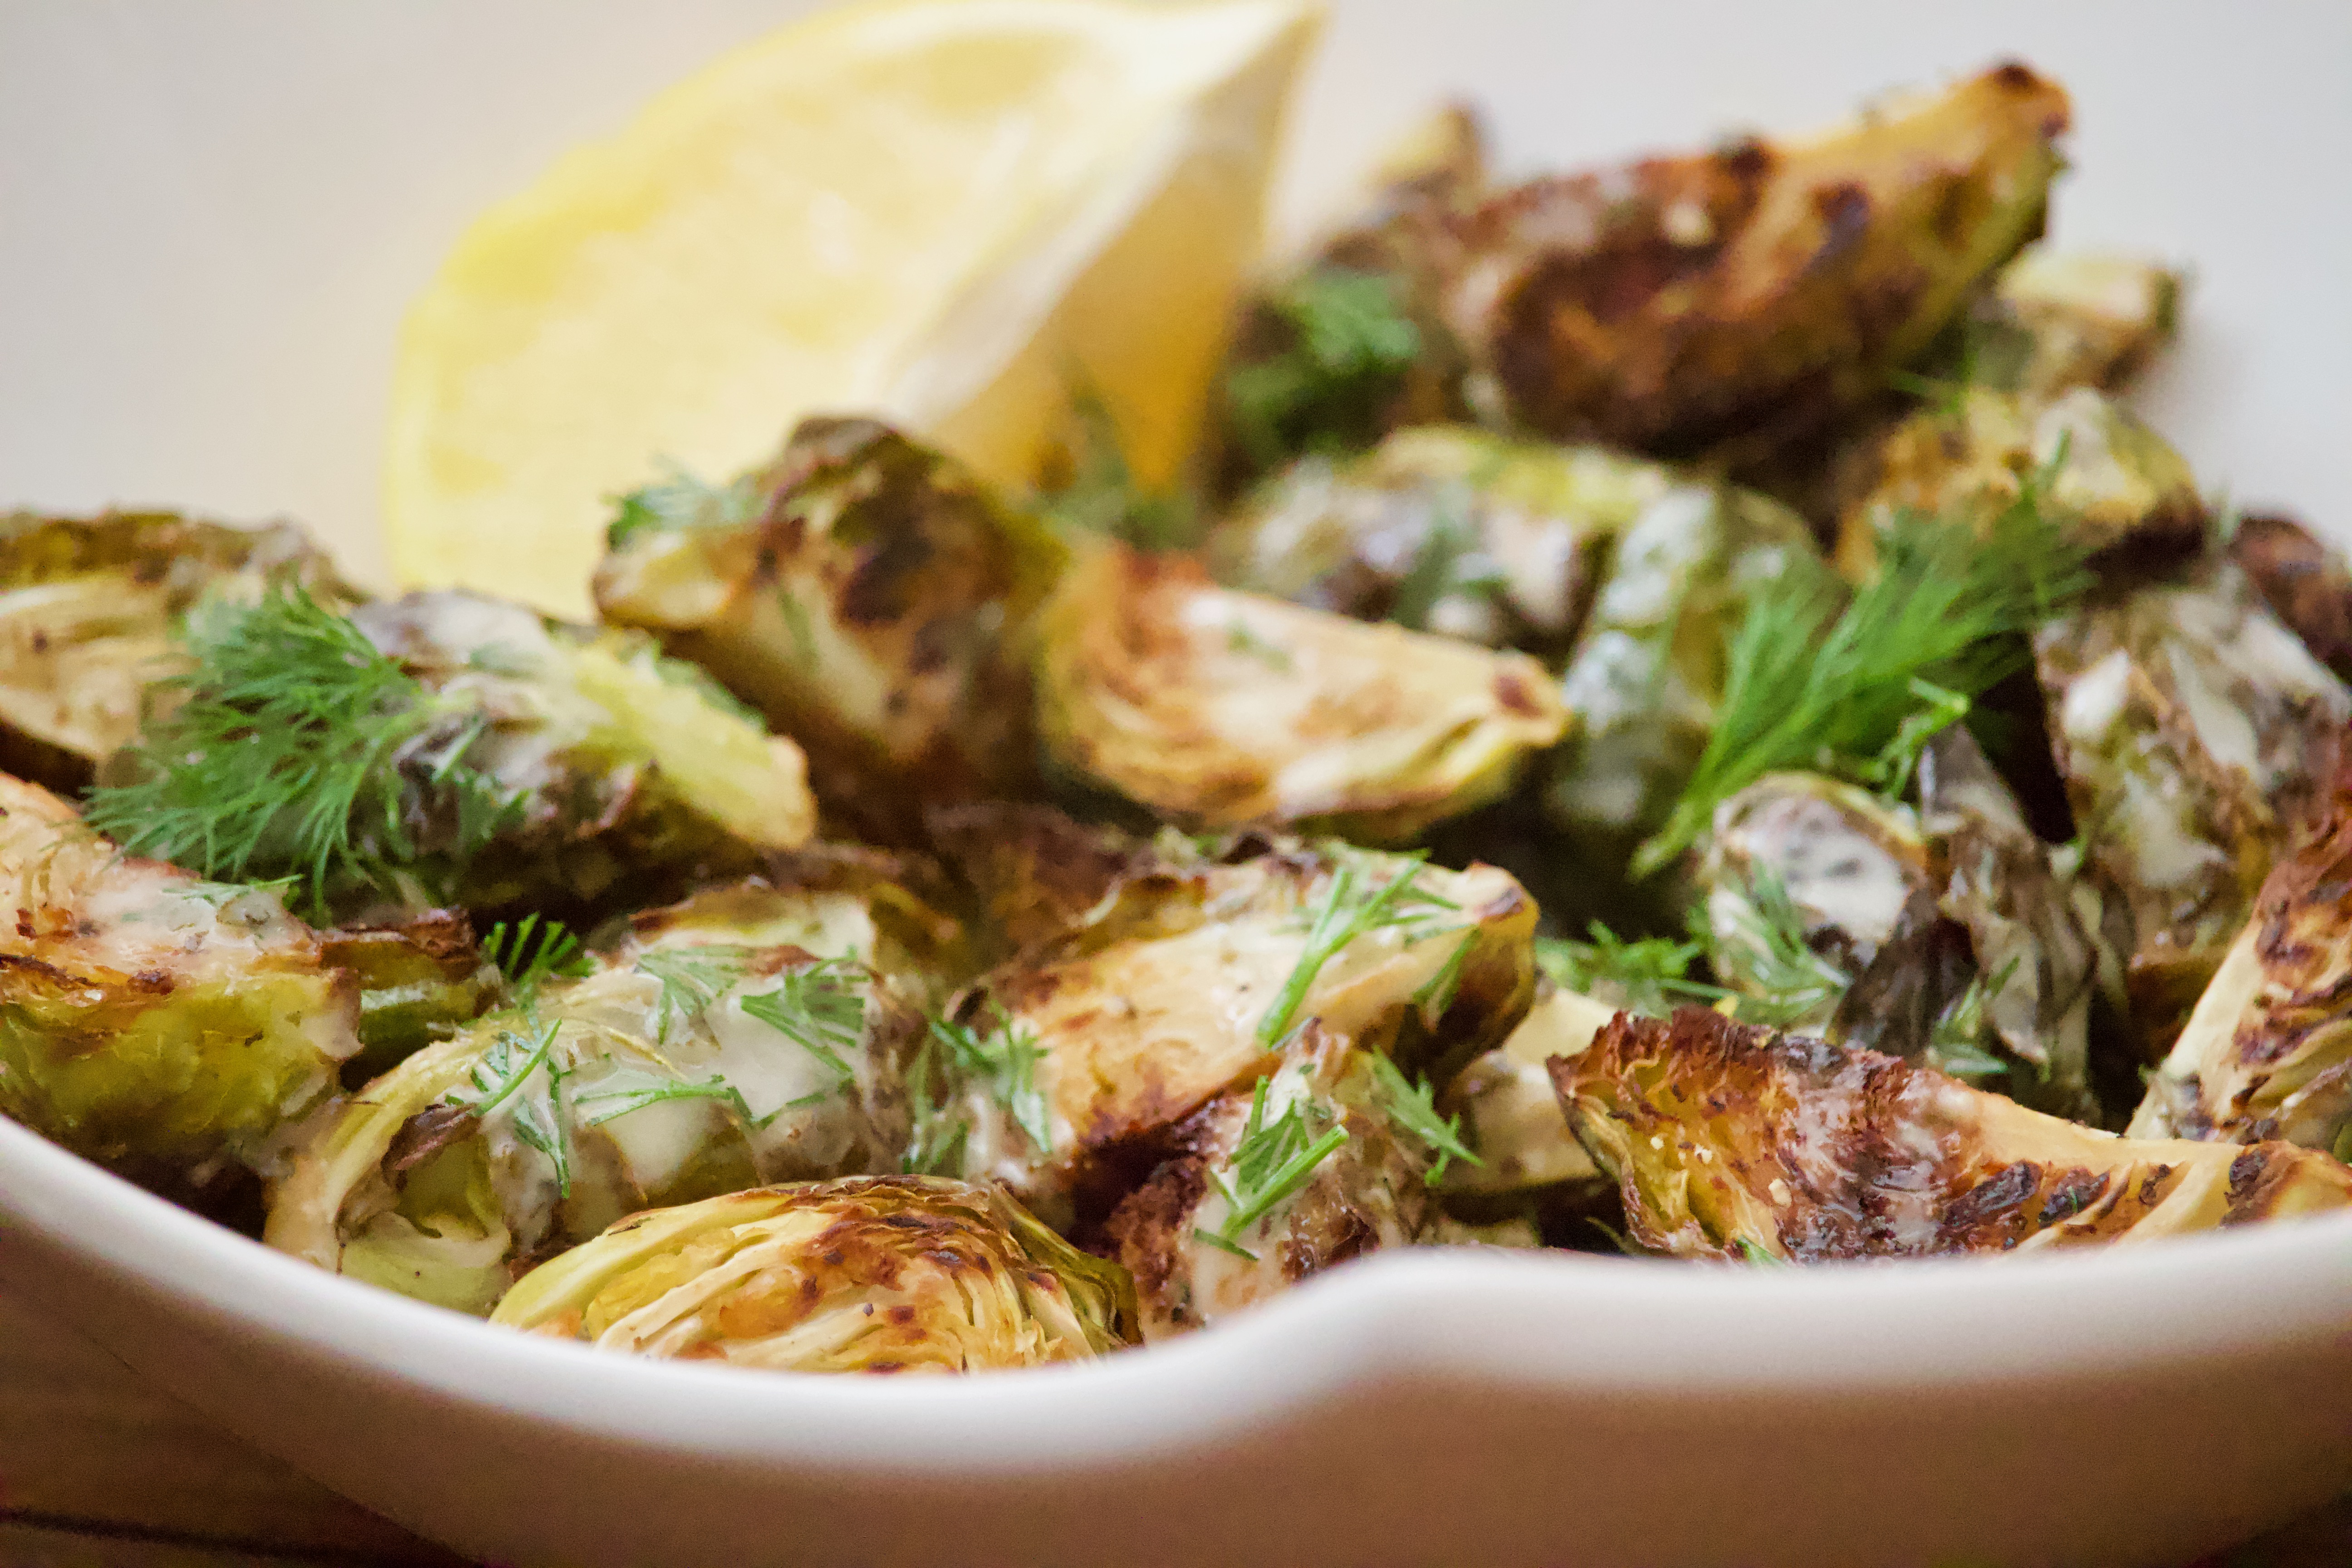 Roasted Lemon Dill Brussel Sprouts